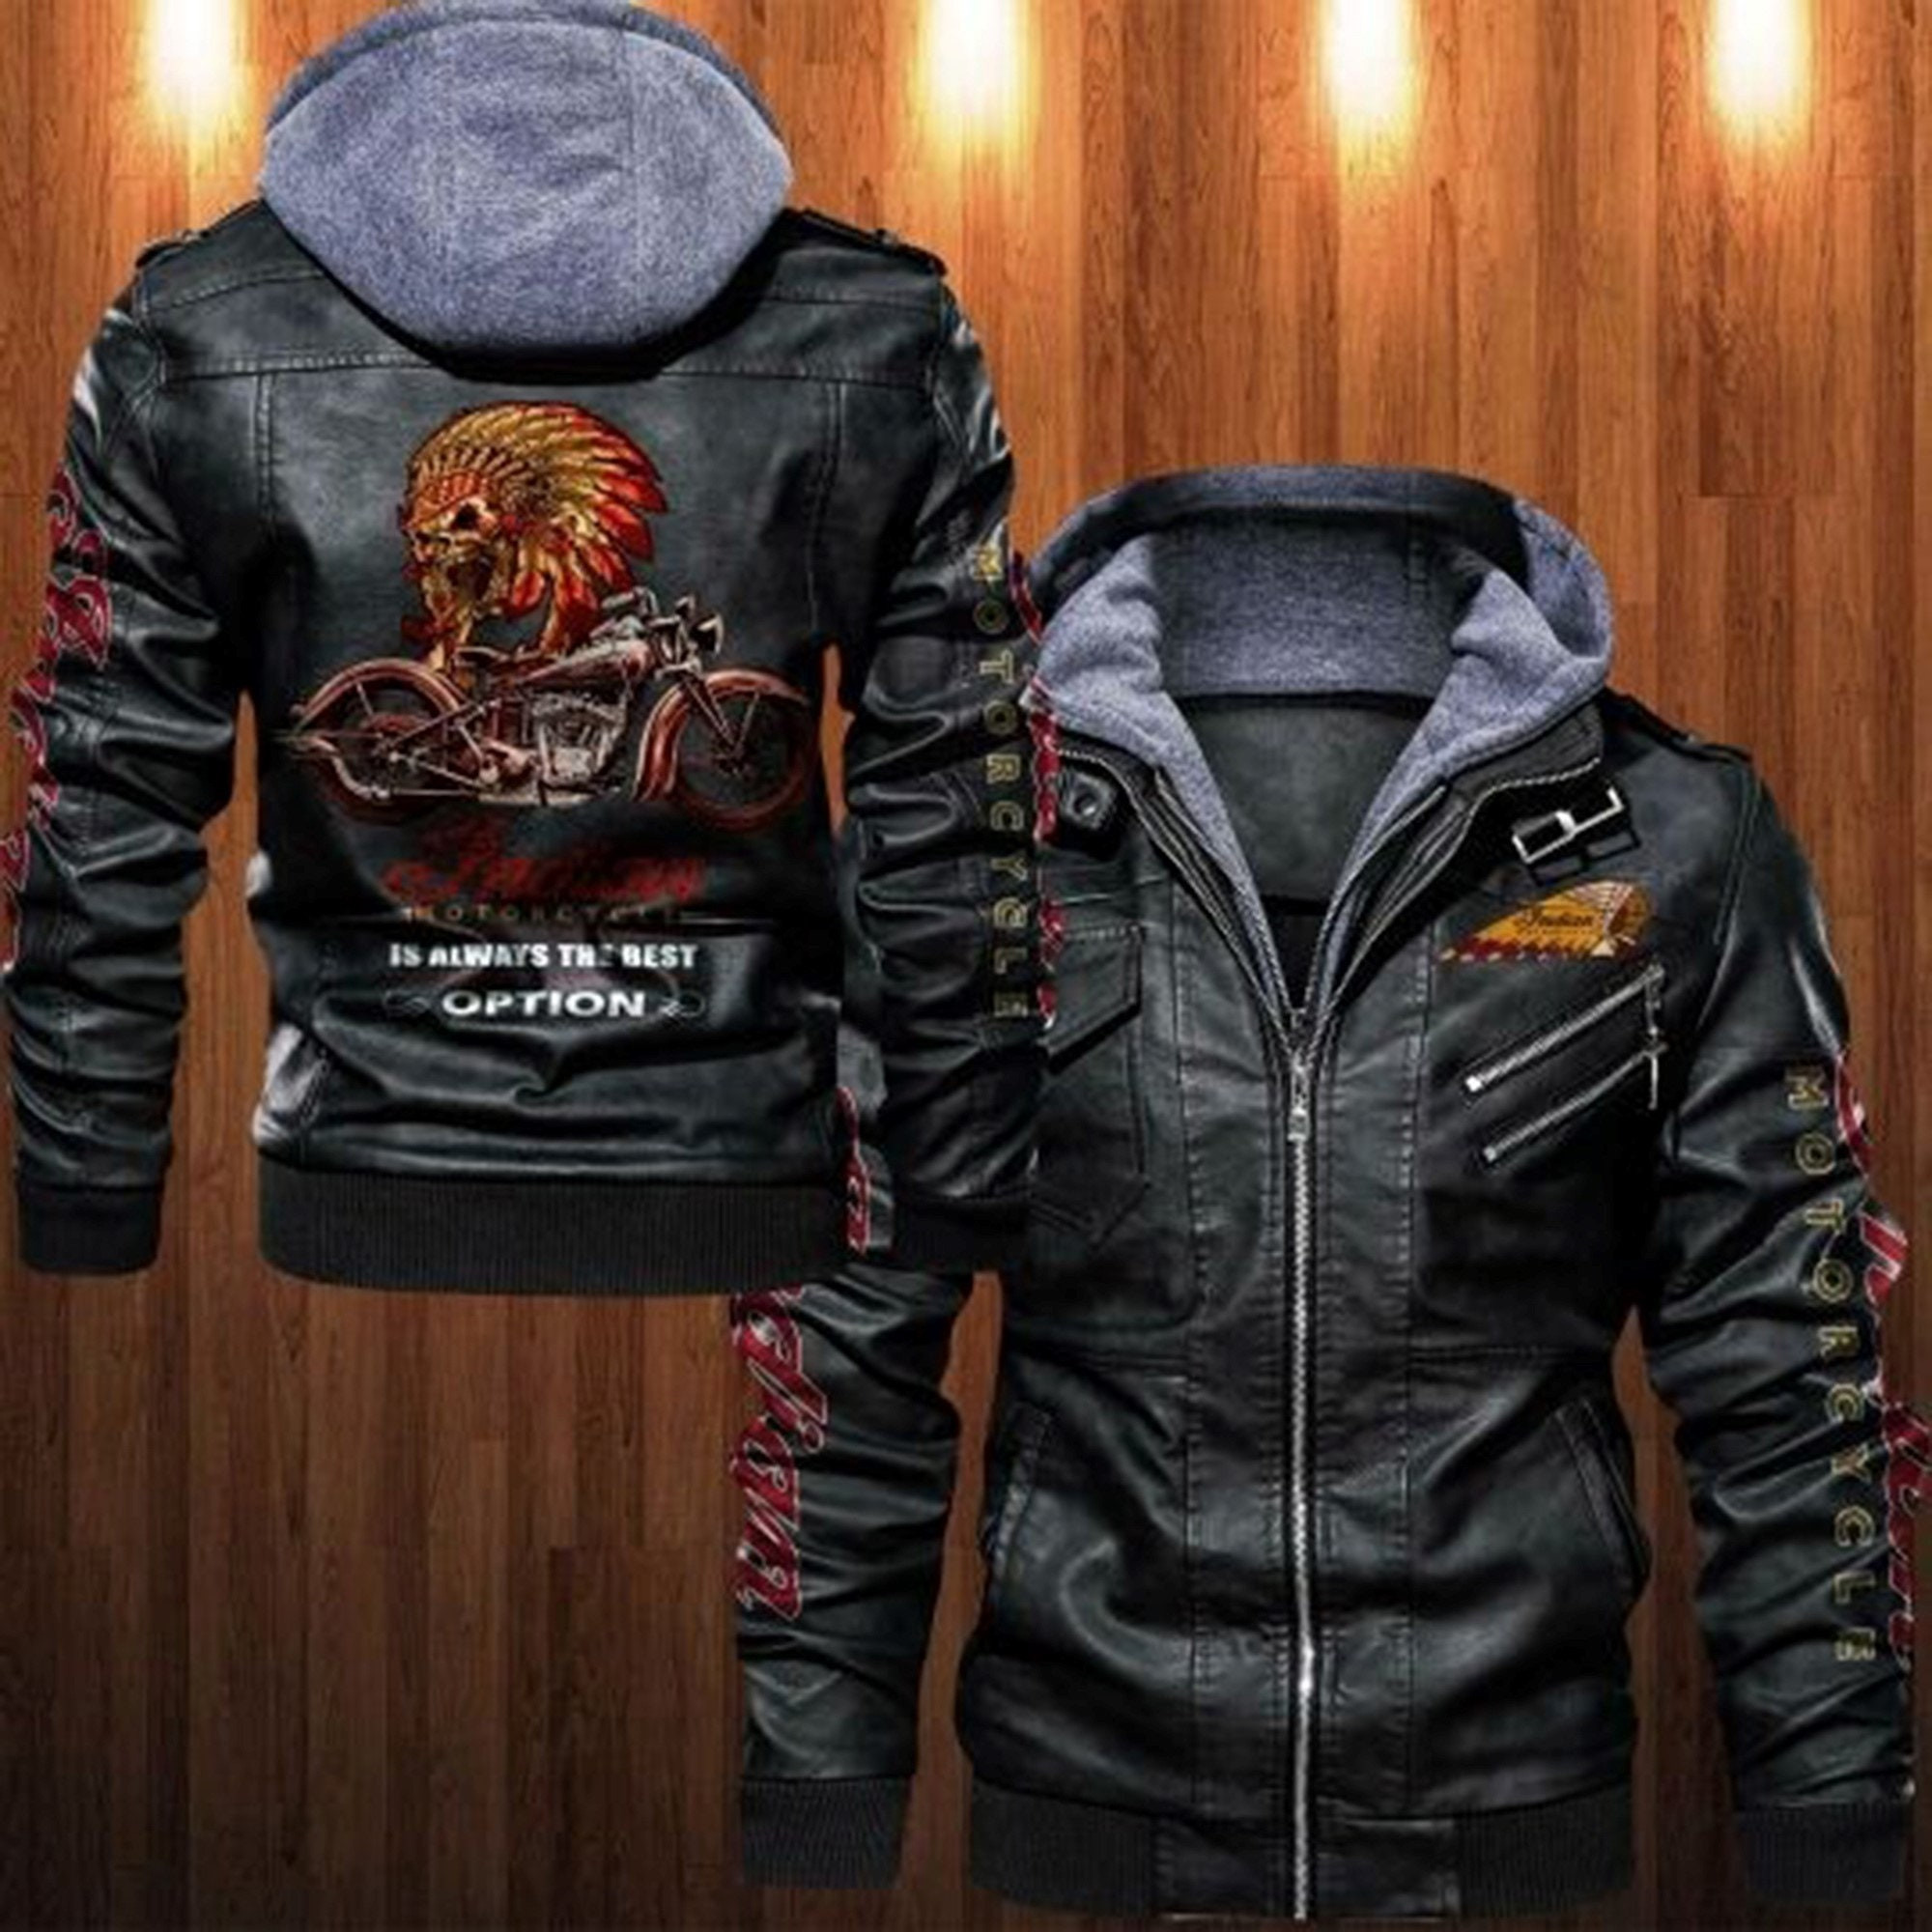 These Amazing Leather Jacket will add to the appeal of your outfit 427